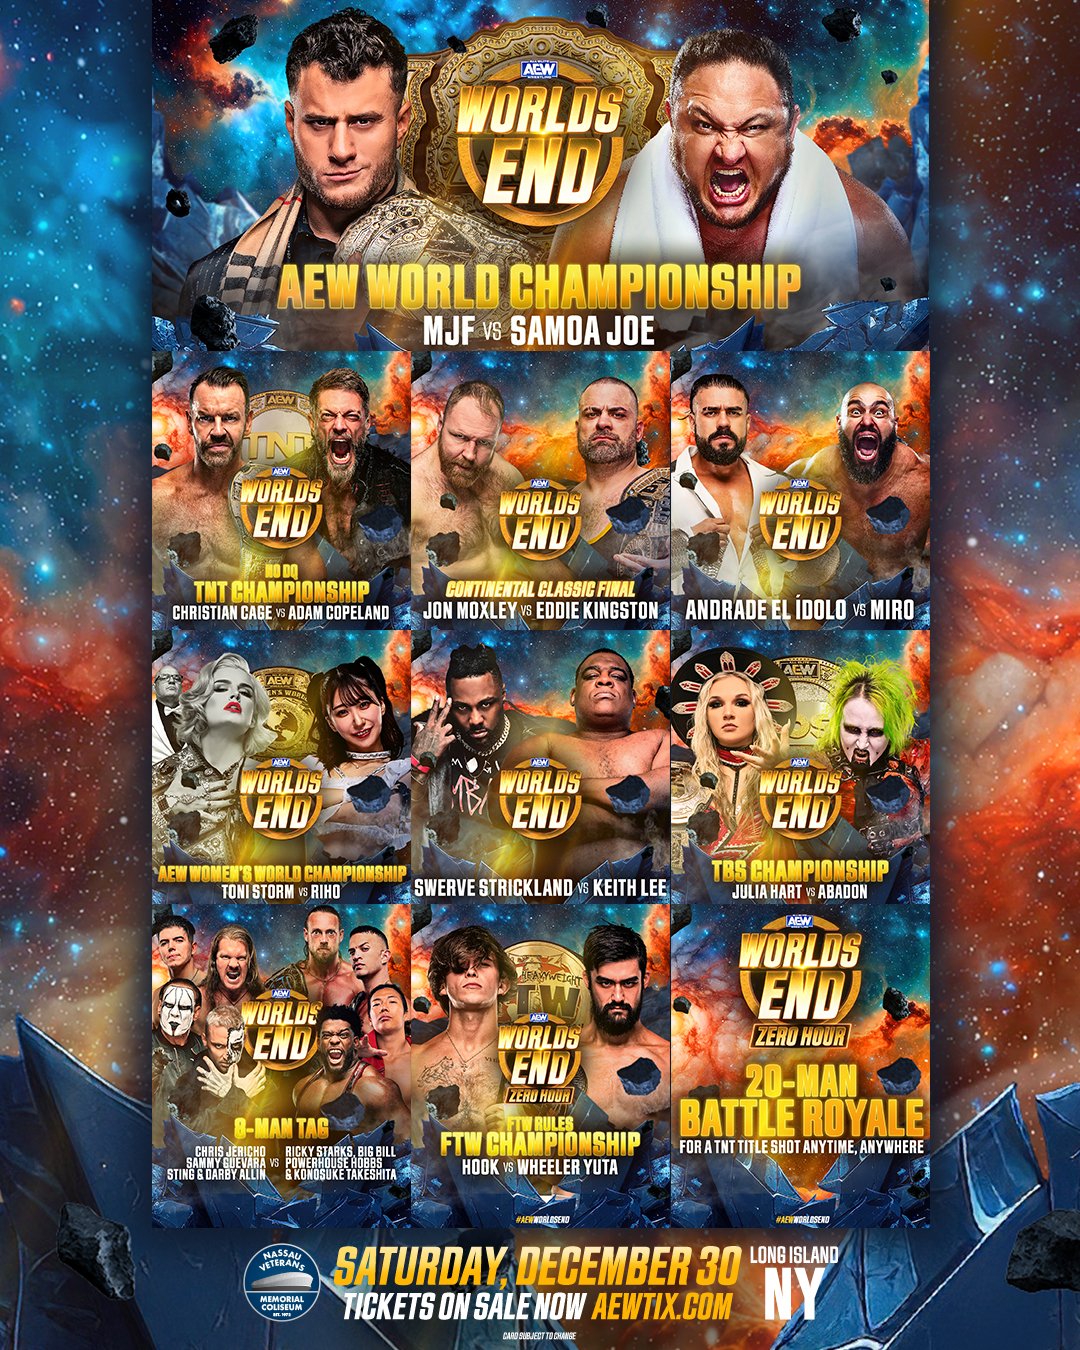 AEW Worlds End Match Card Graphic